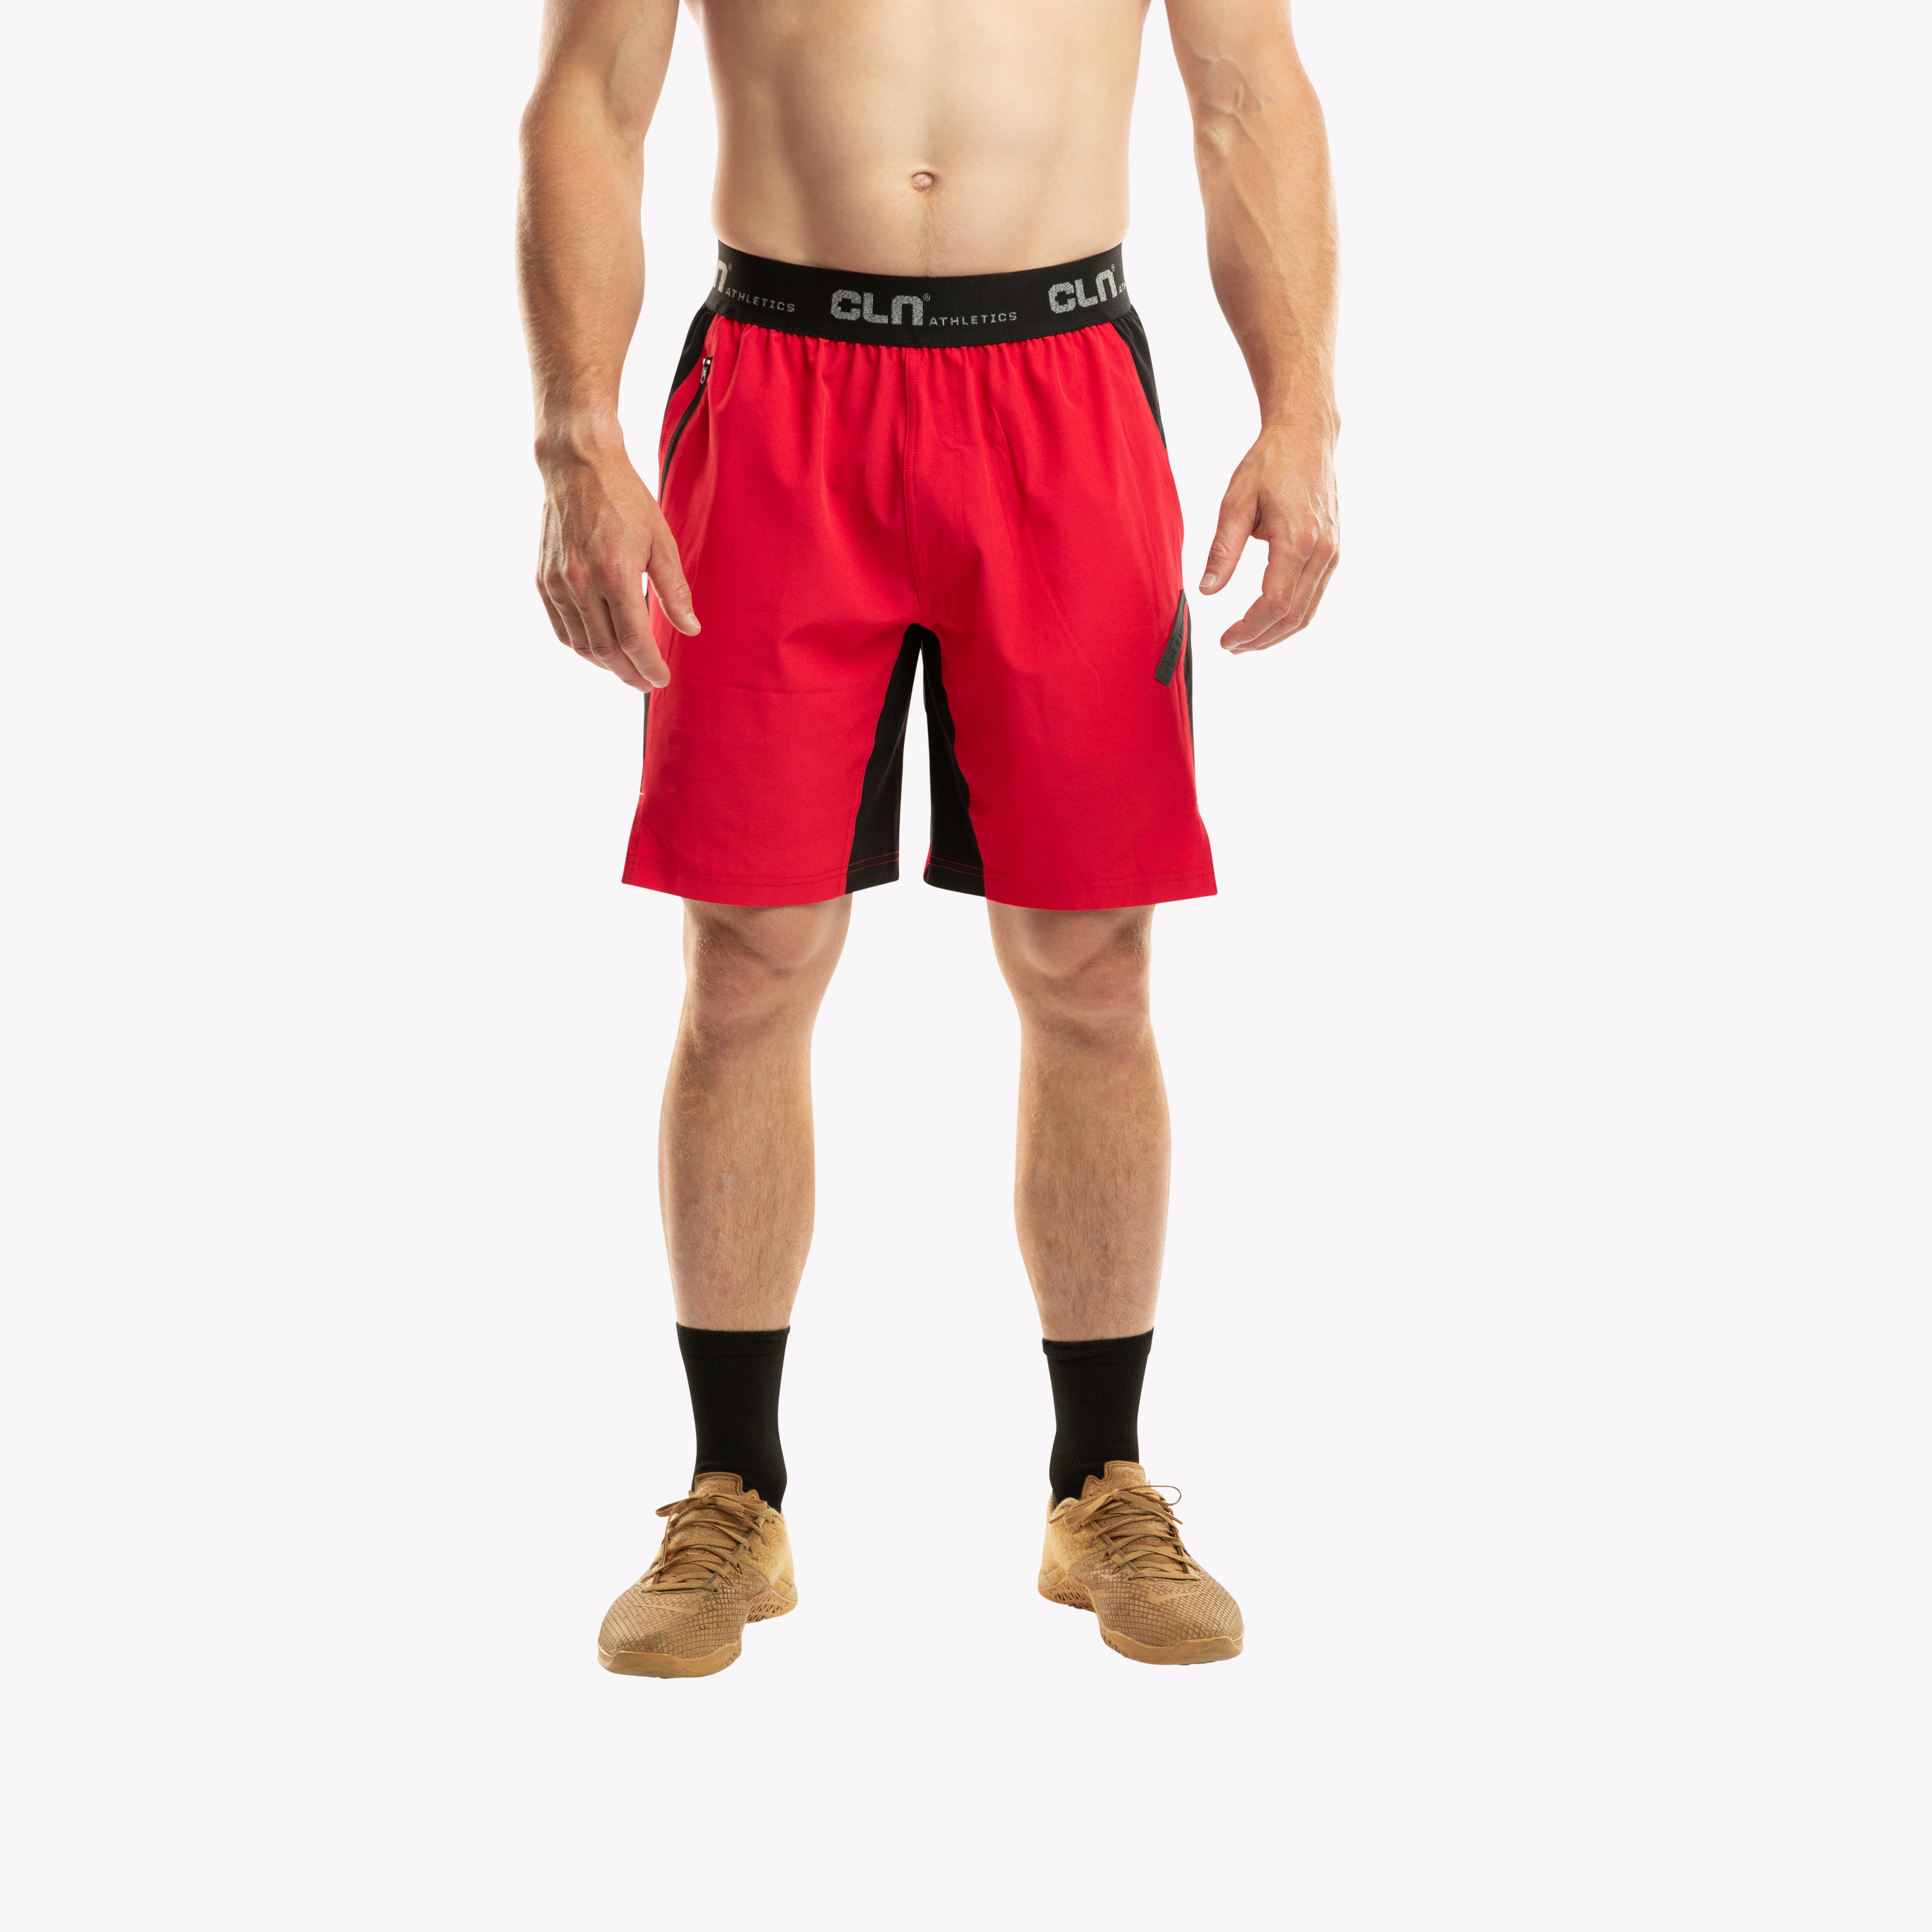 CLN Injection Shorts Red